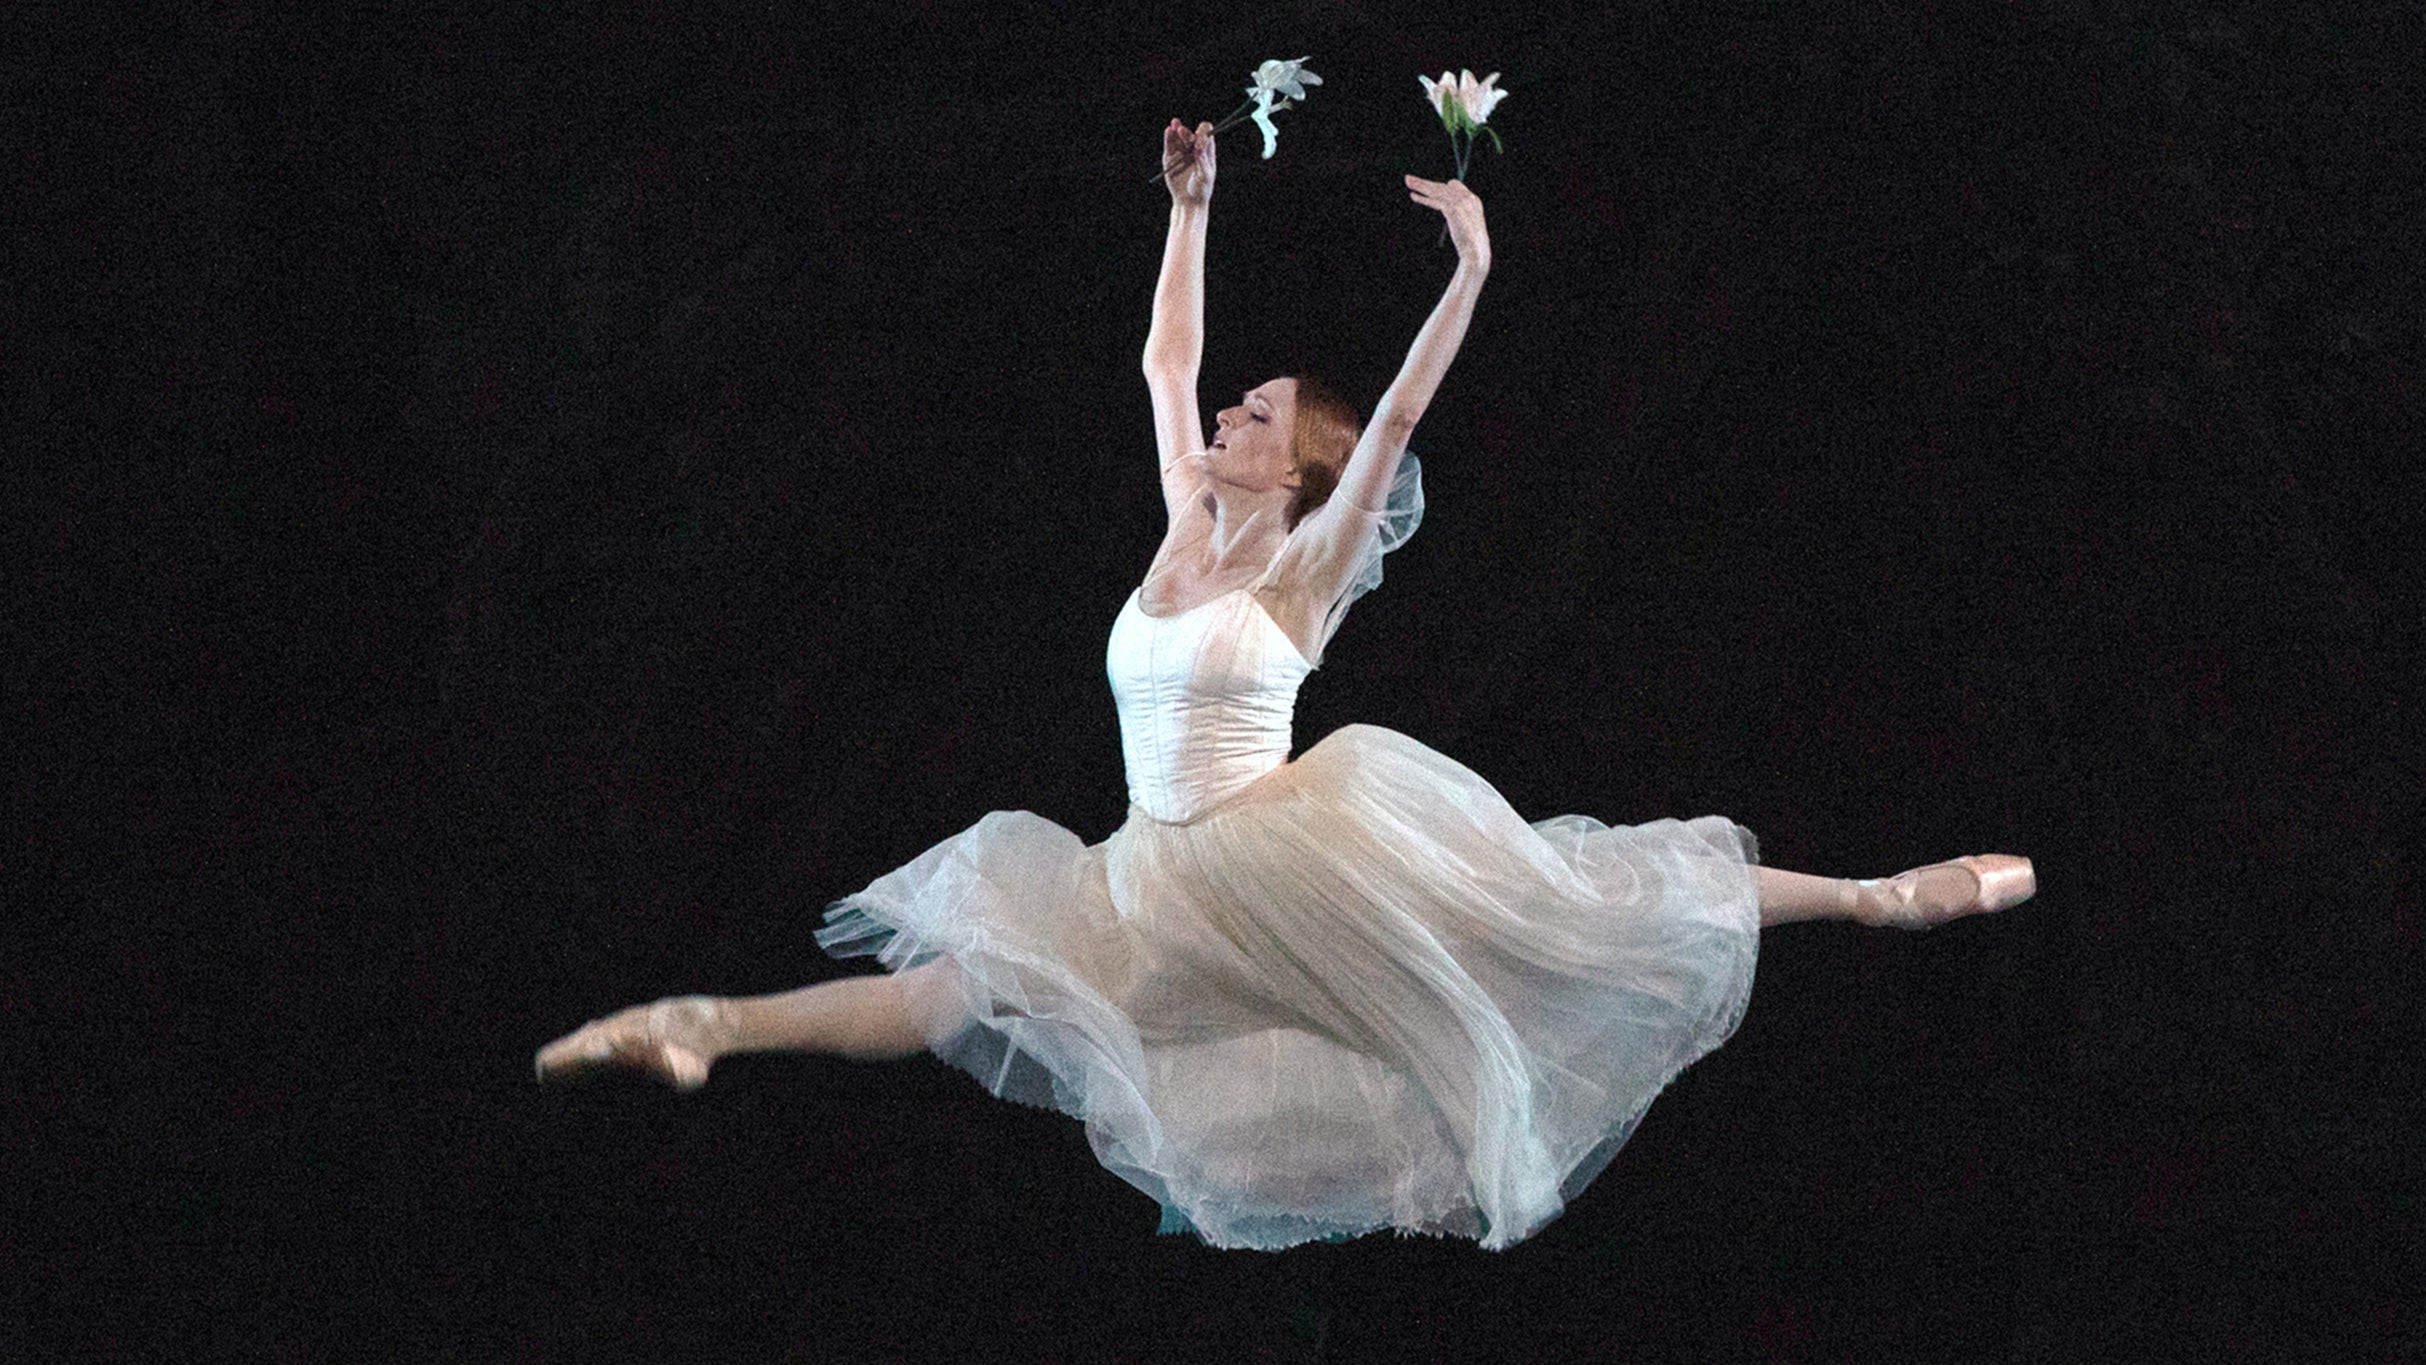 American Ballet Theatre Giselle in Durham promo photo for Friends of DPAC presale offer code